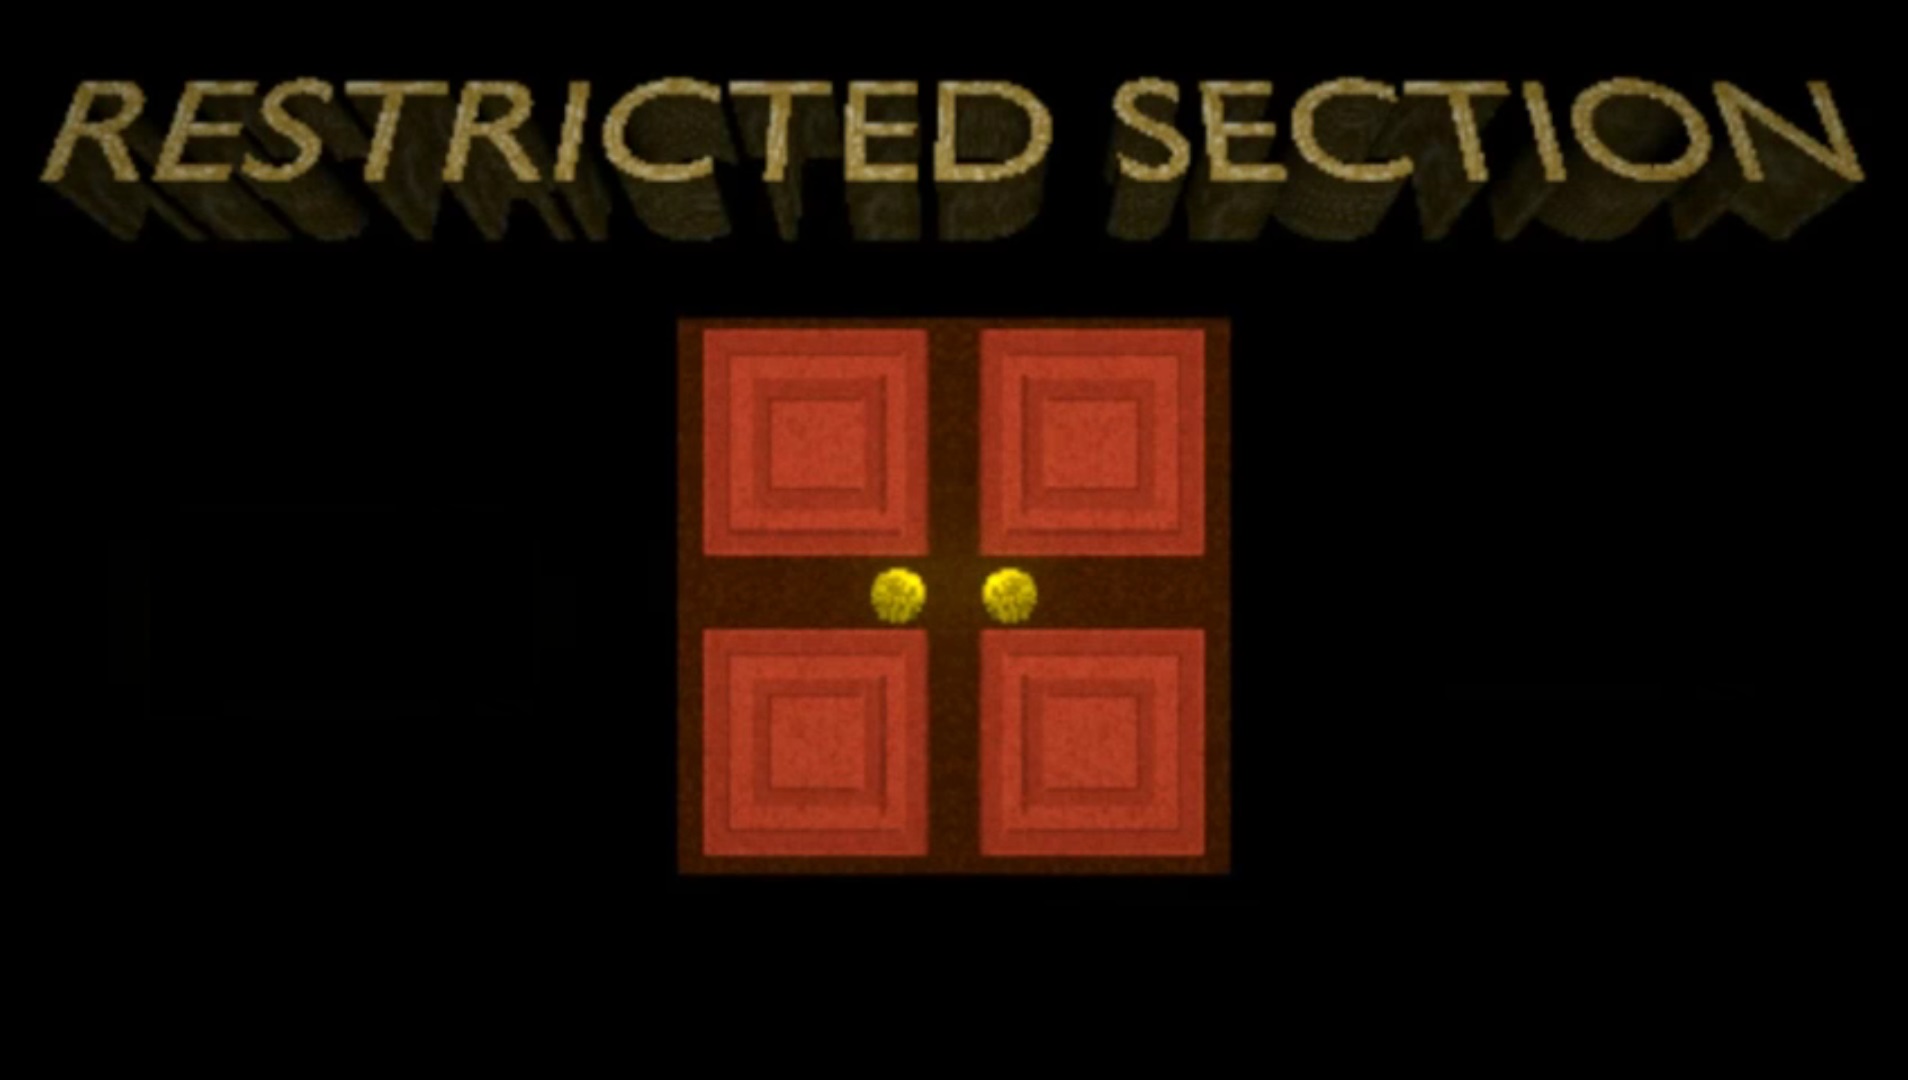 Restricted section